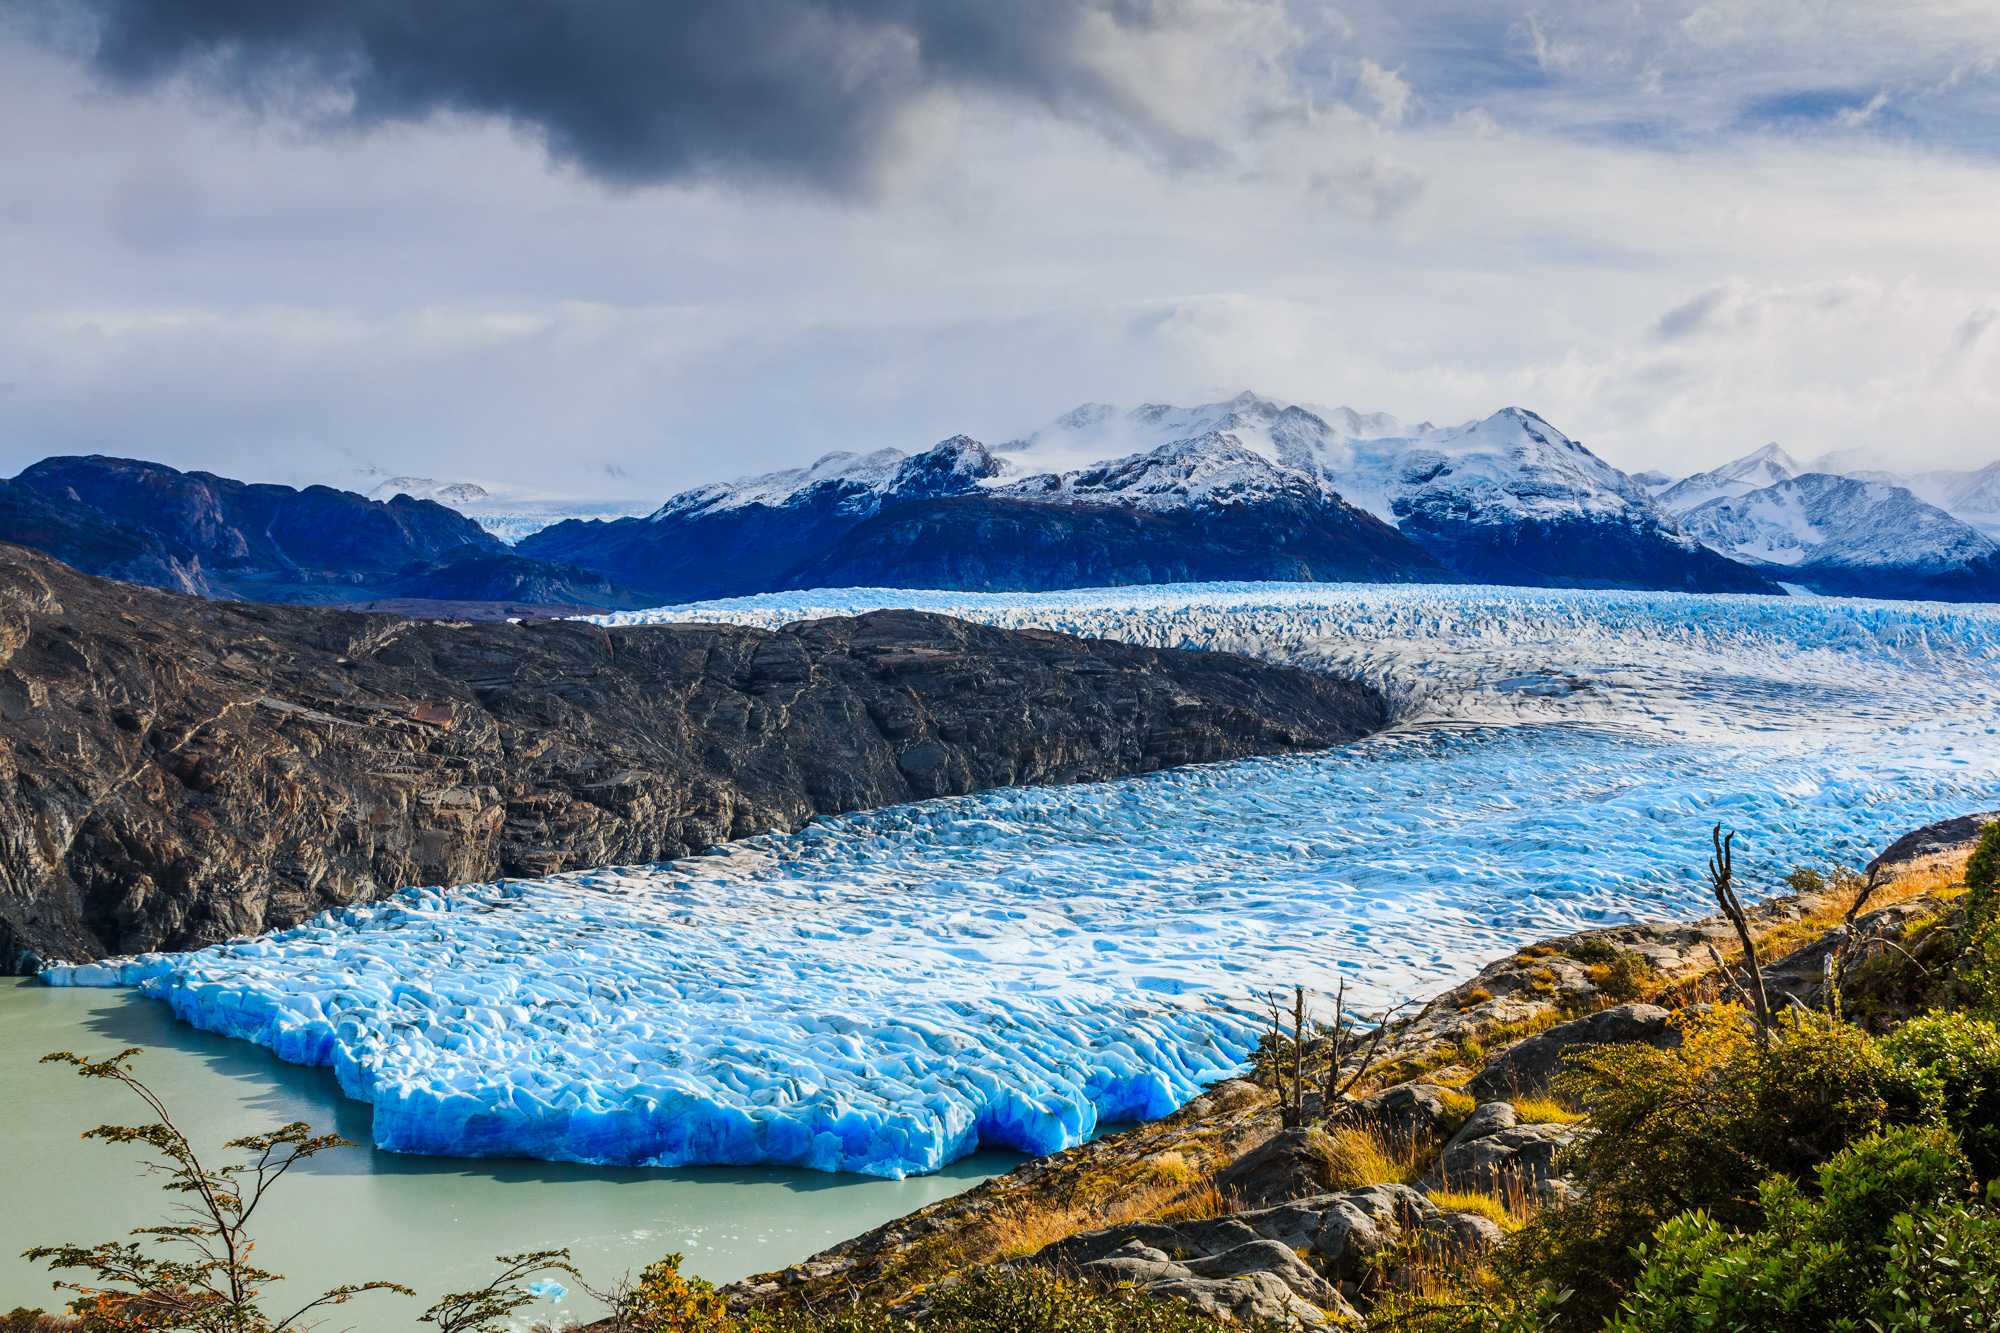 Large glacier in dappled sunshine and clouds with snow-capped mountains in the background.